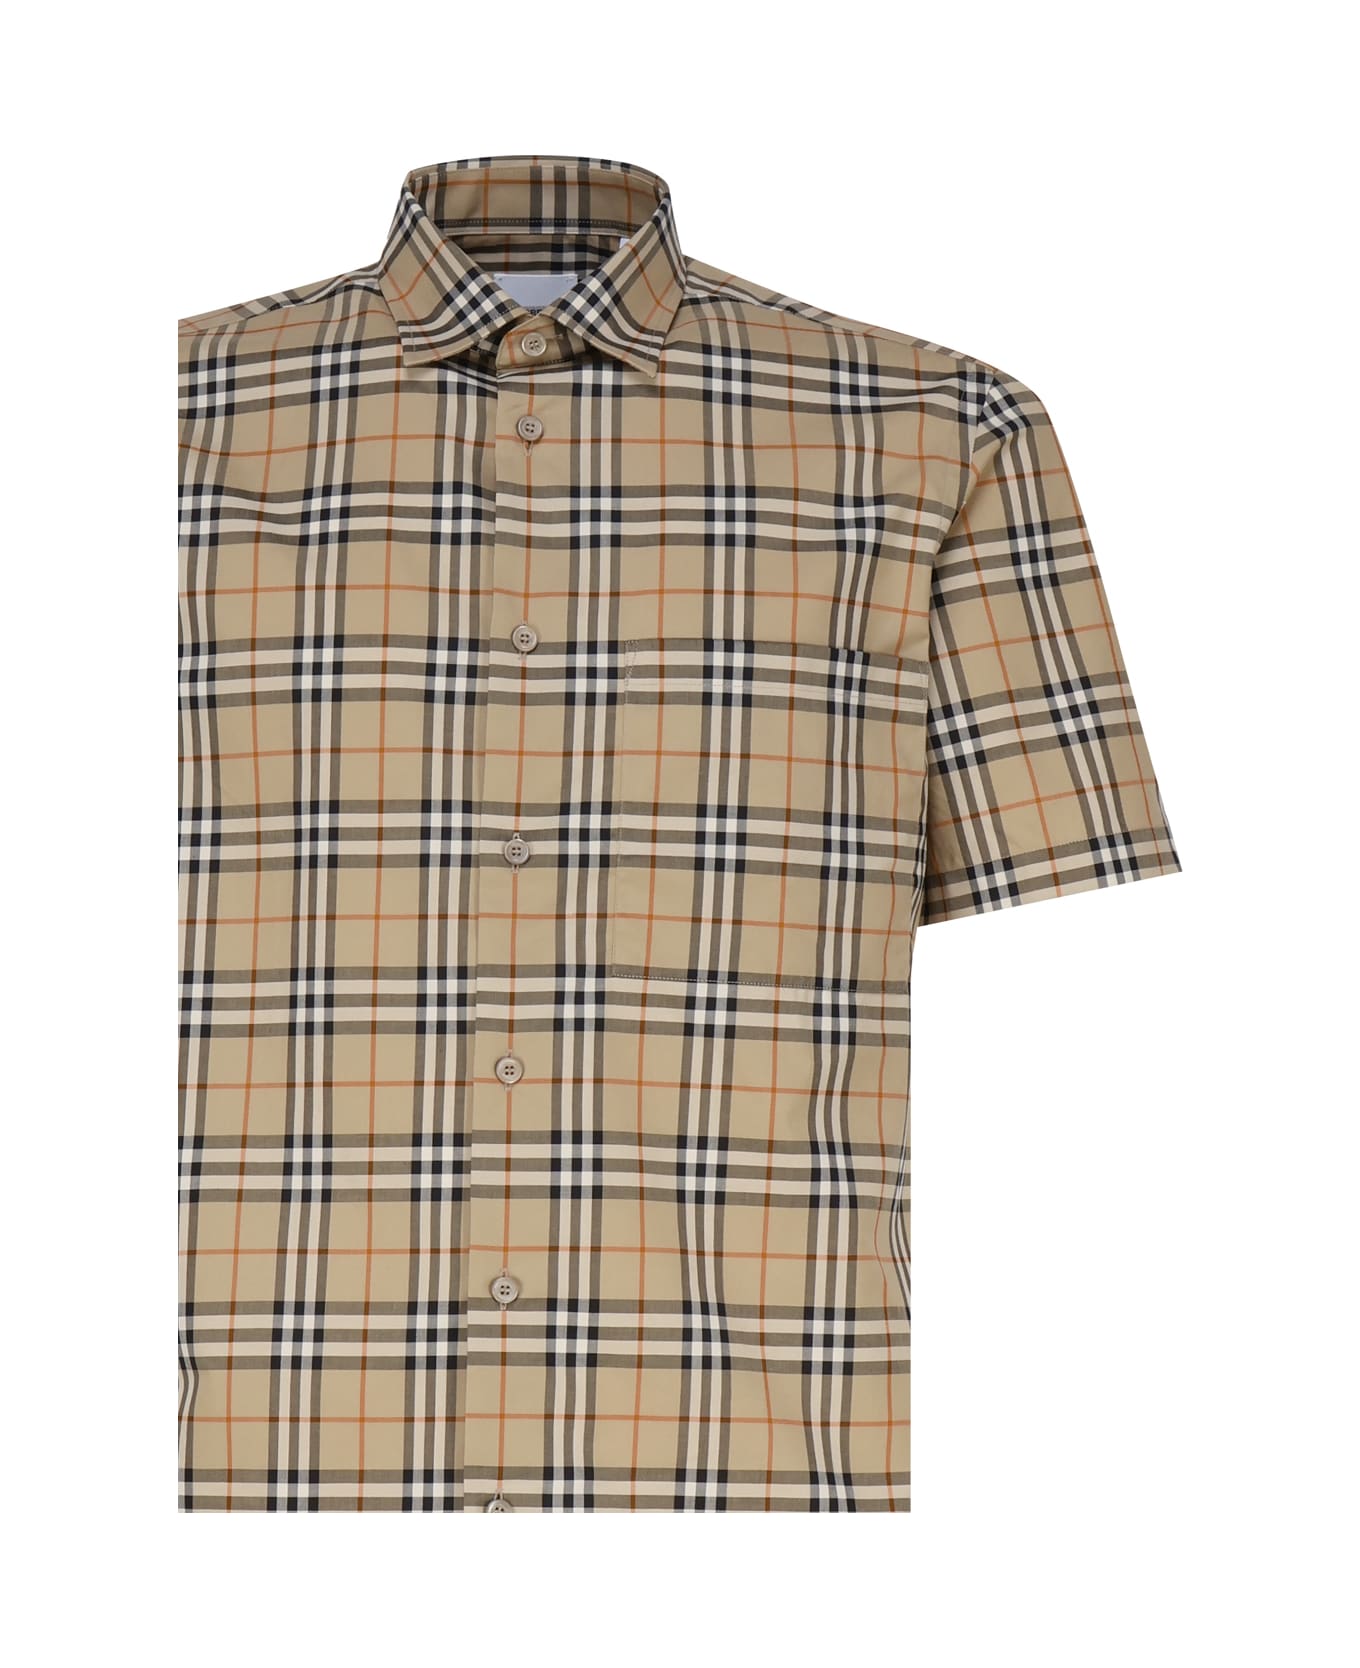 Burberry Vintage Check Shirt In Cotton - Beige